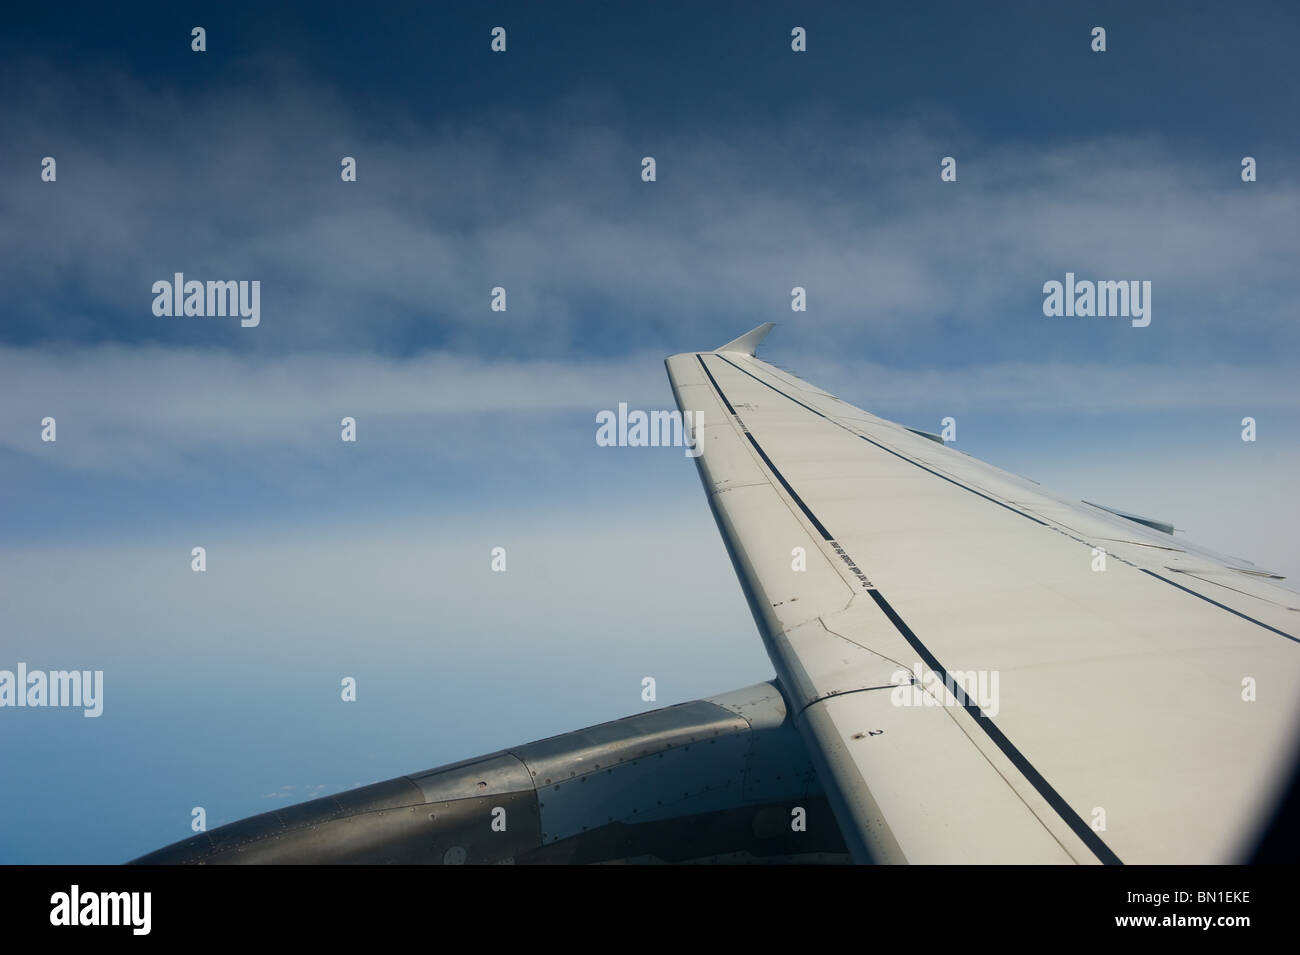 The view from the window of a passenger jet showing the engine and wing with a blue sky, Europe 2010 Stock Photo